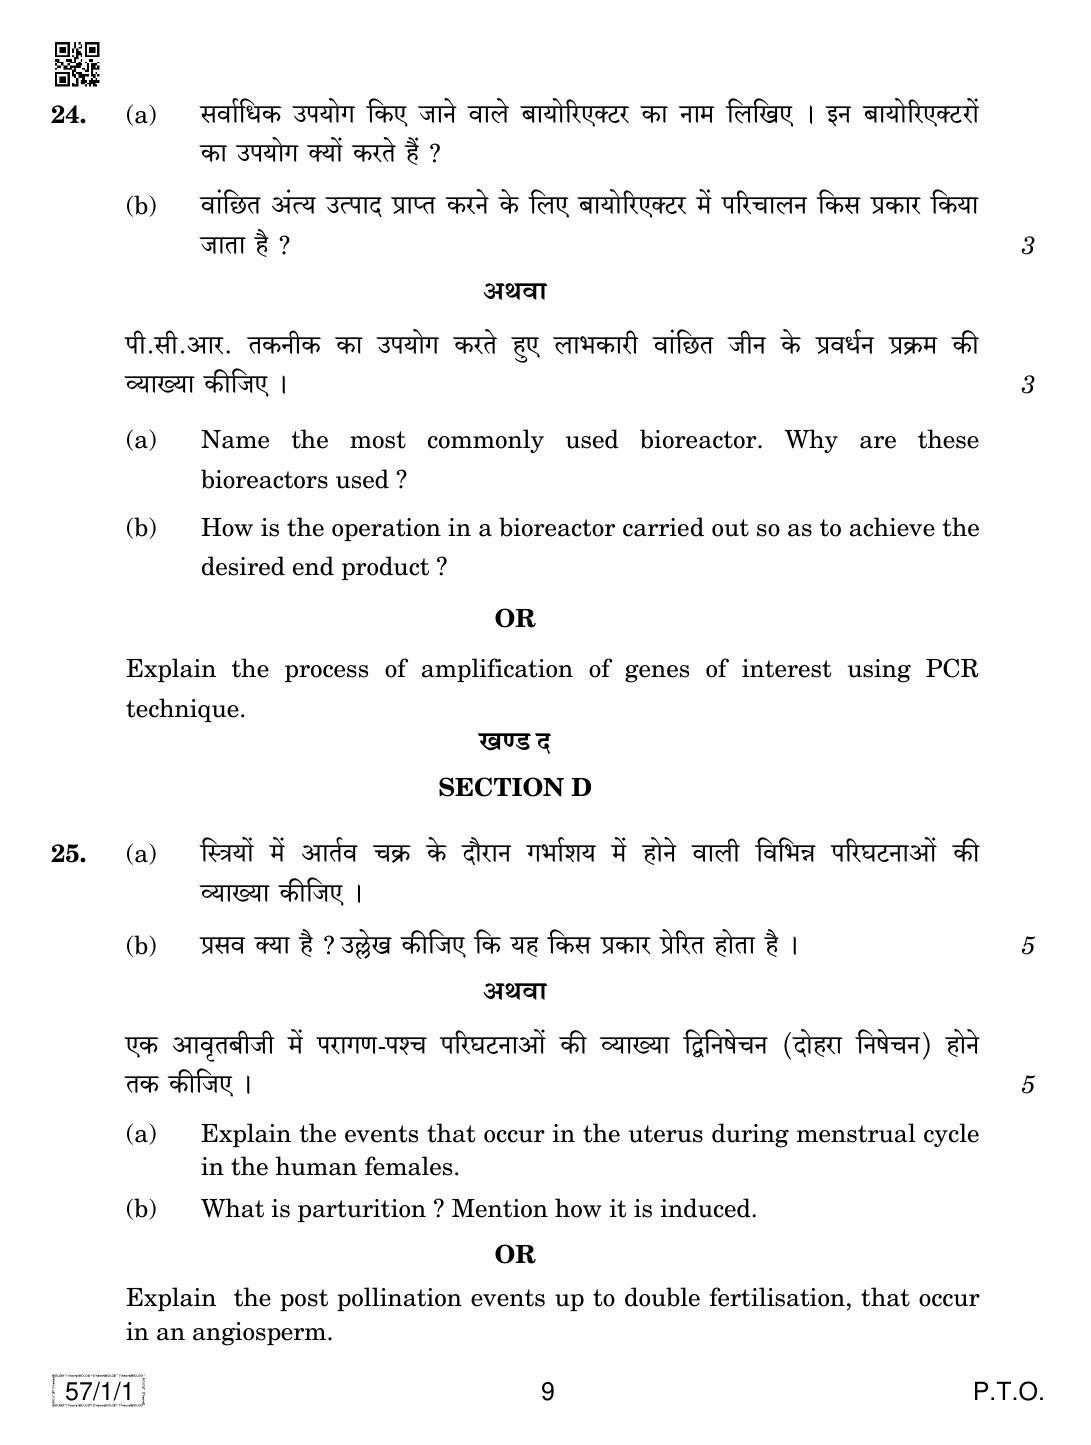 CBSE Class 12 57-1-1 BIOLOGY 2019 Compartment Question Paper - Page 9